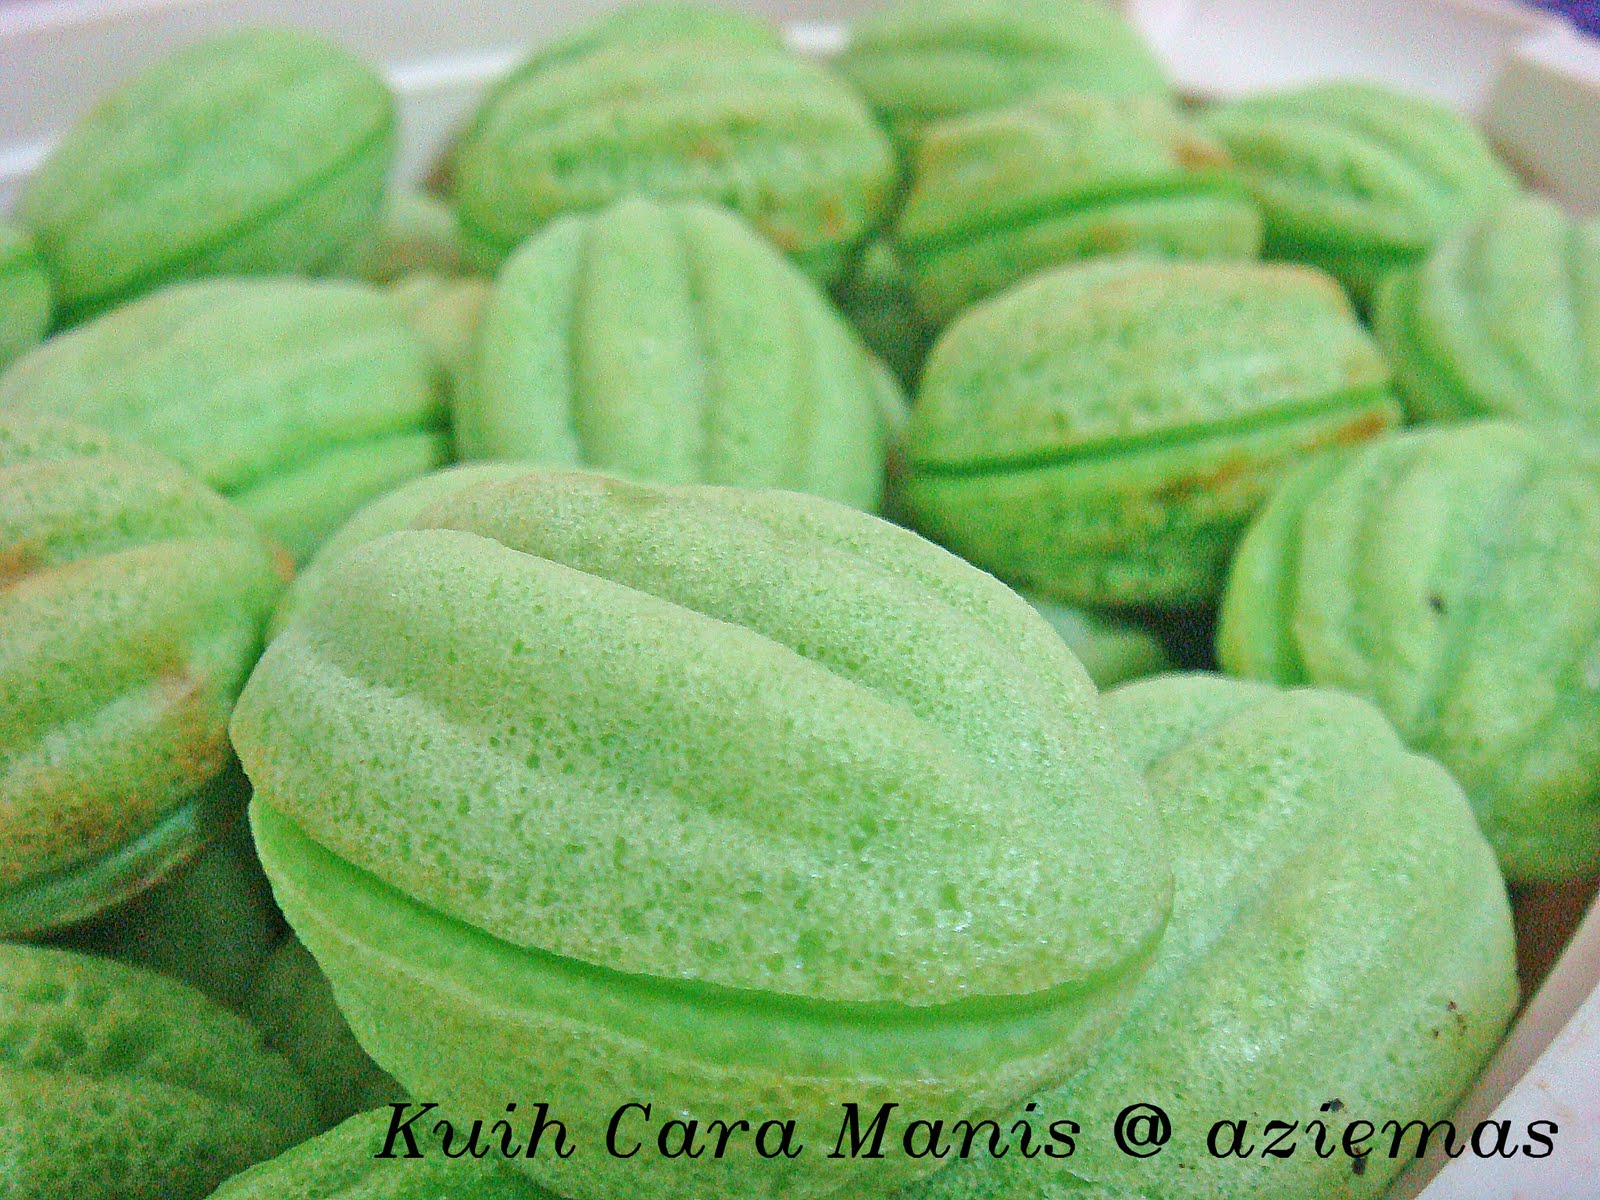 A Family - a journey of life: Kuih Cara